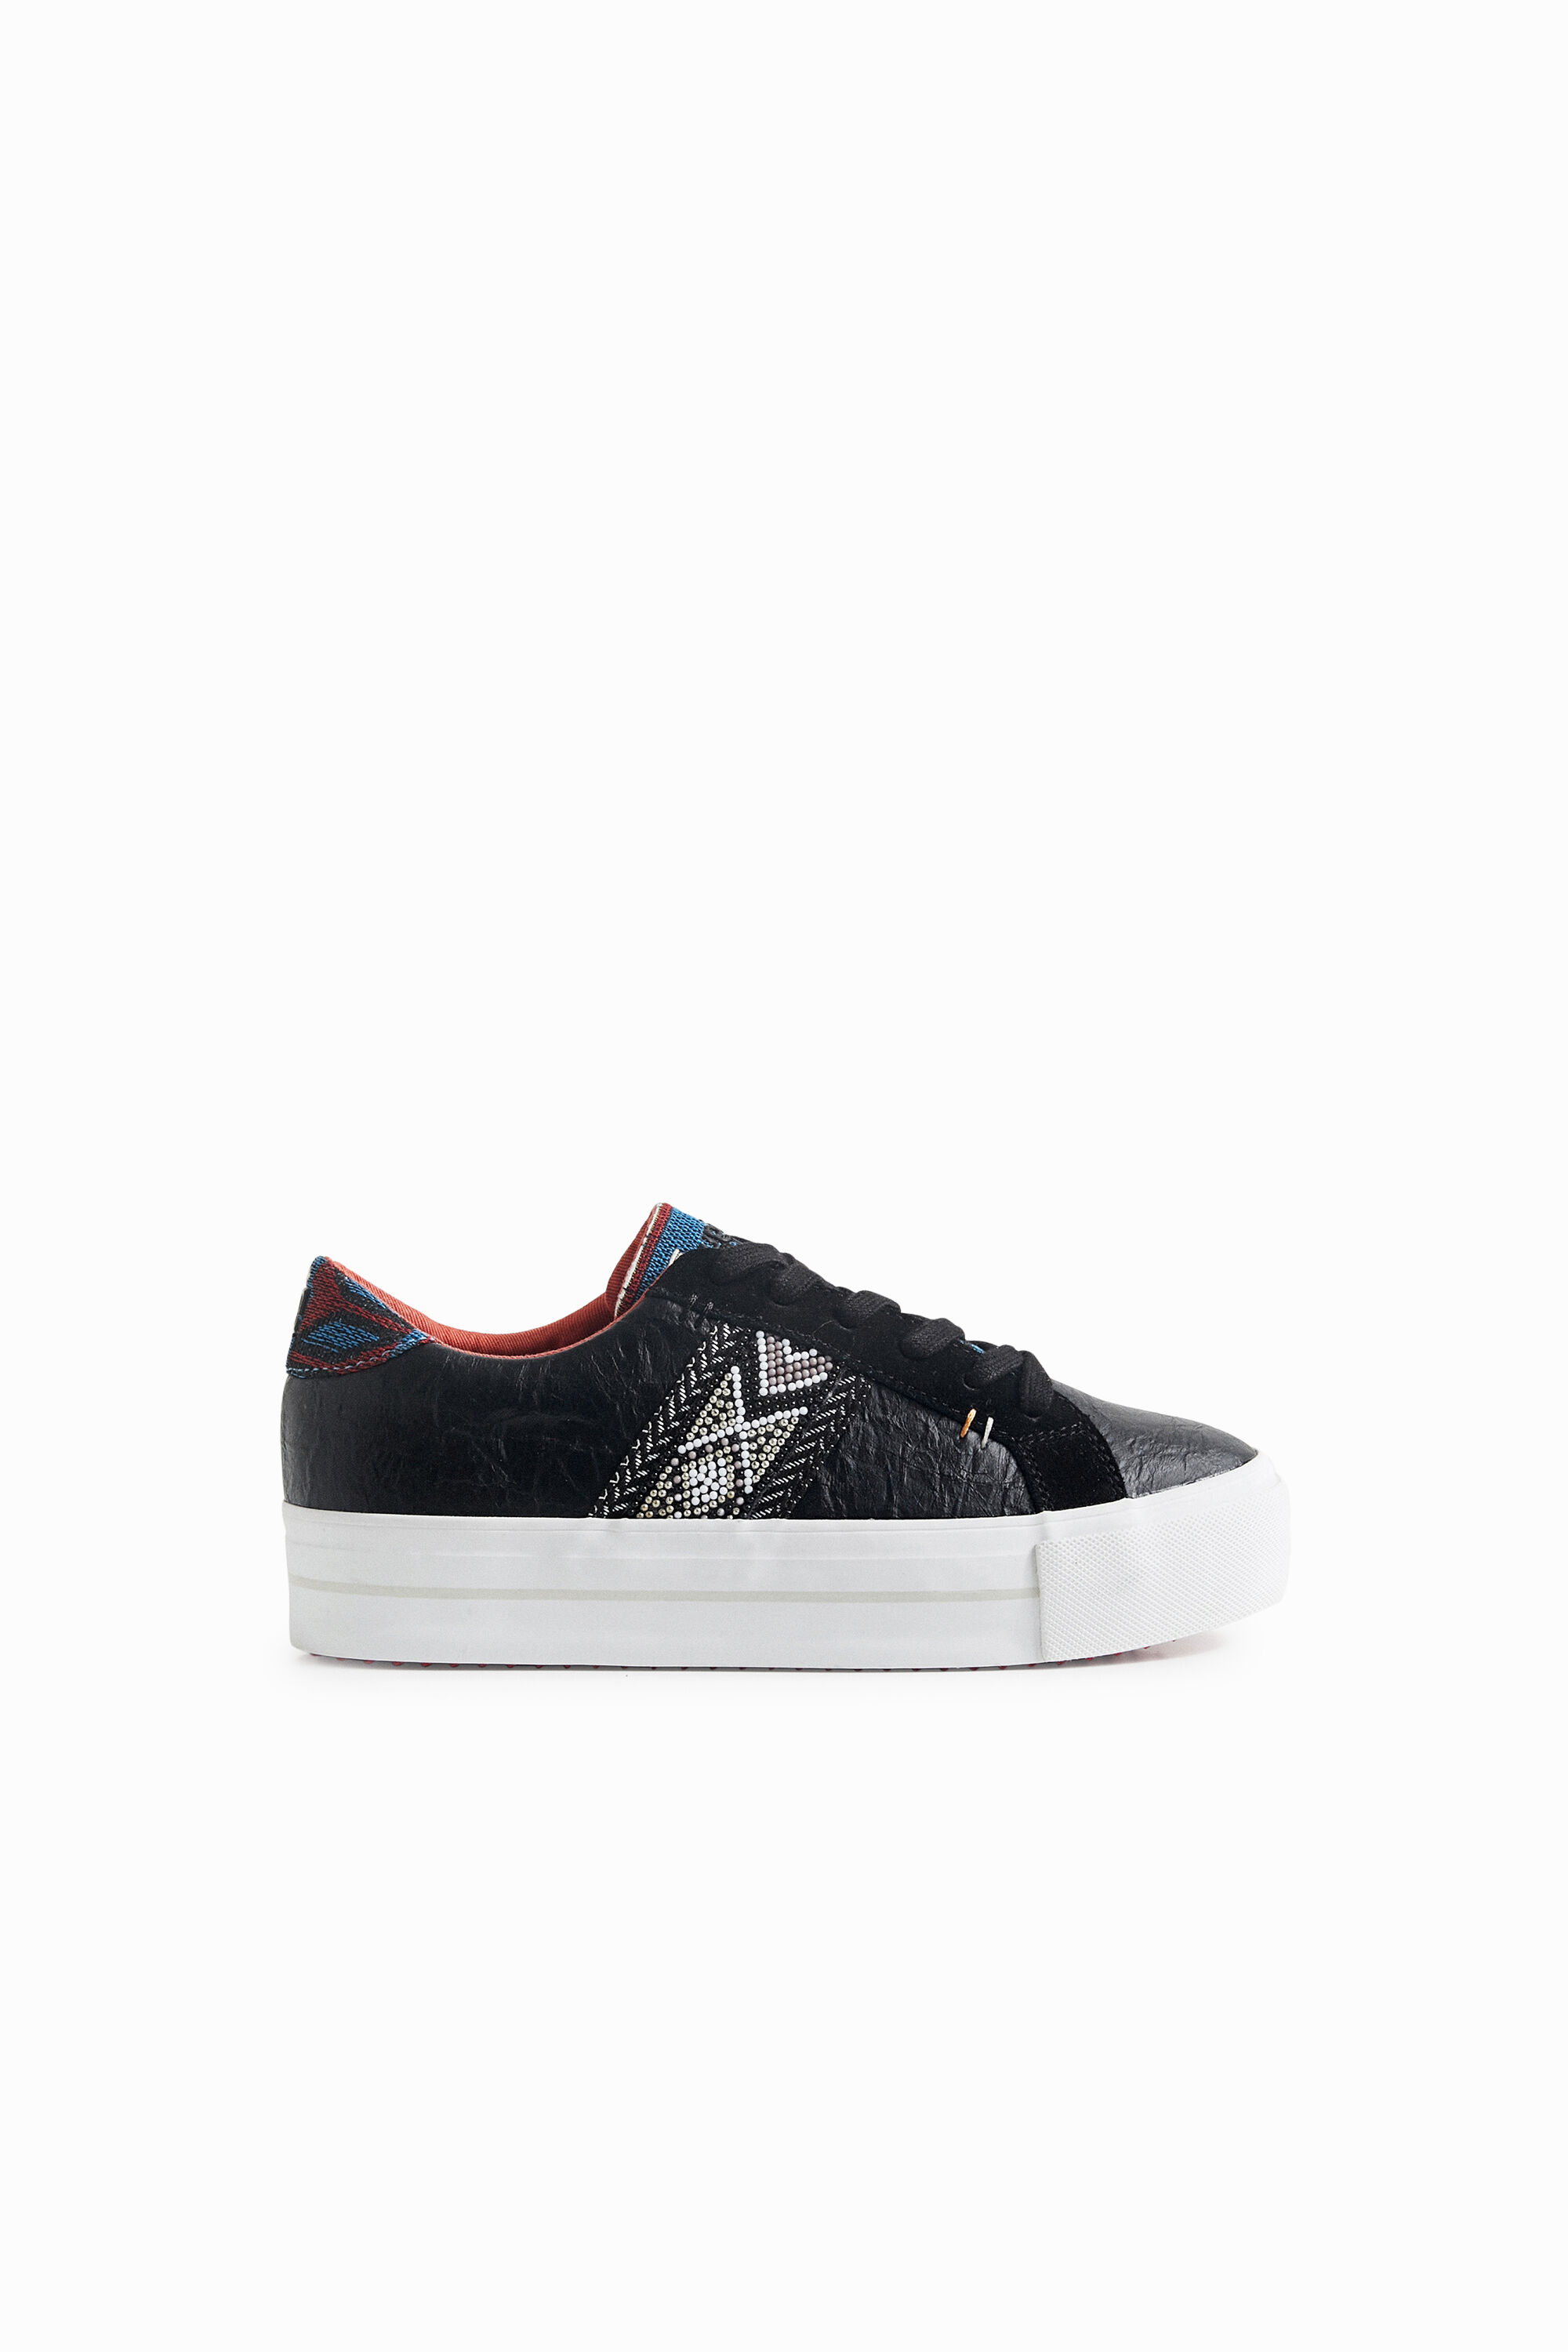 Desigual Ethnic Sneakers Chunky Sole In Black